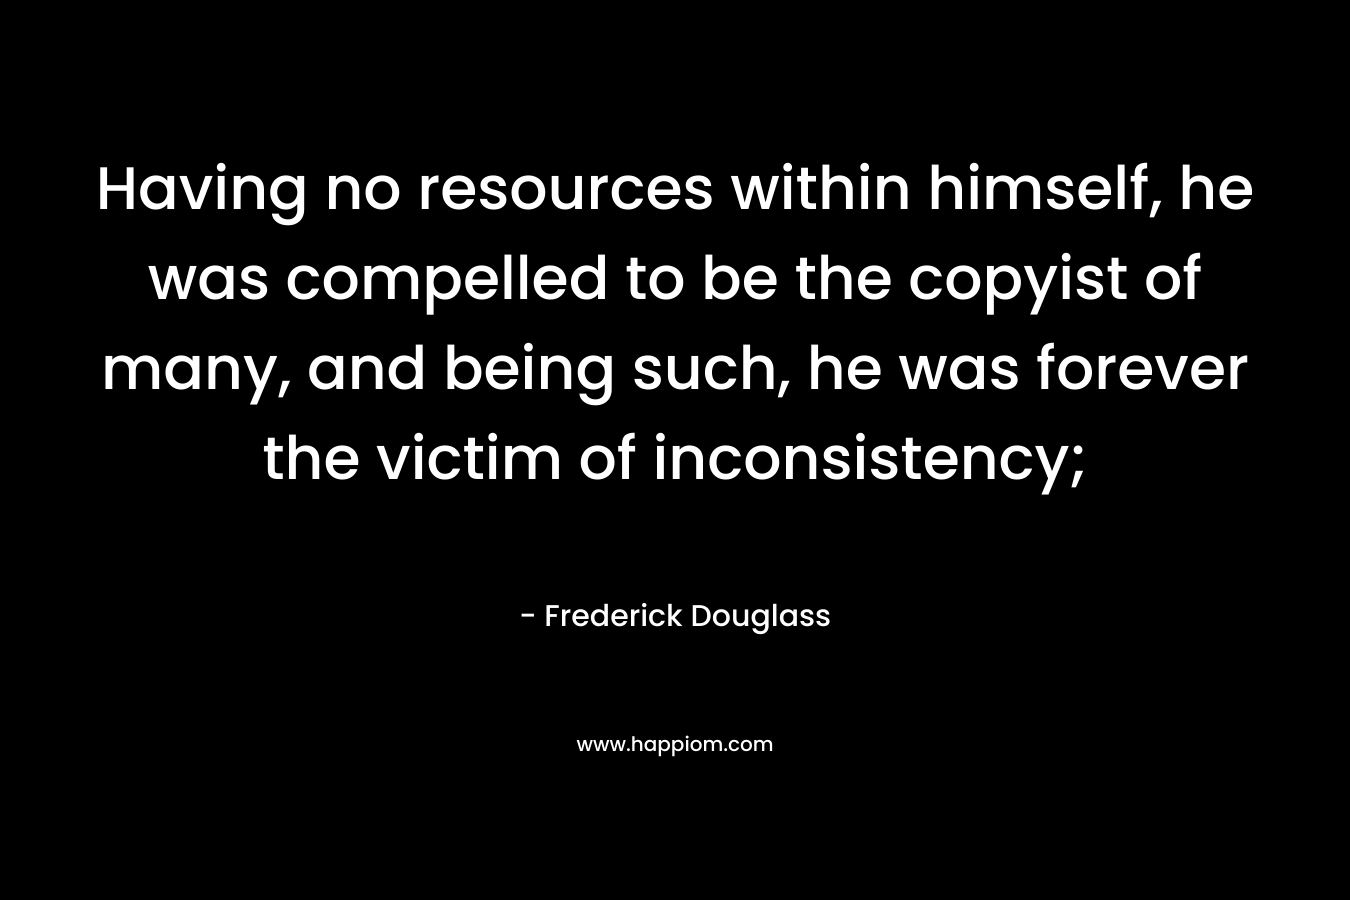 Having no resources within himself, he was compelled to be the copyist of many, and being such, he was forever the victim of inconsistency; – Frederick Douglass